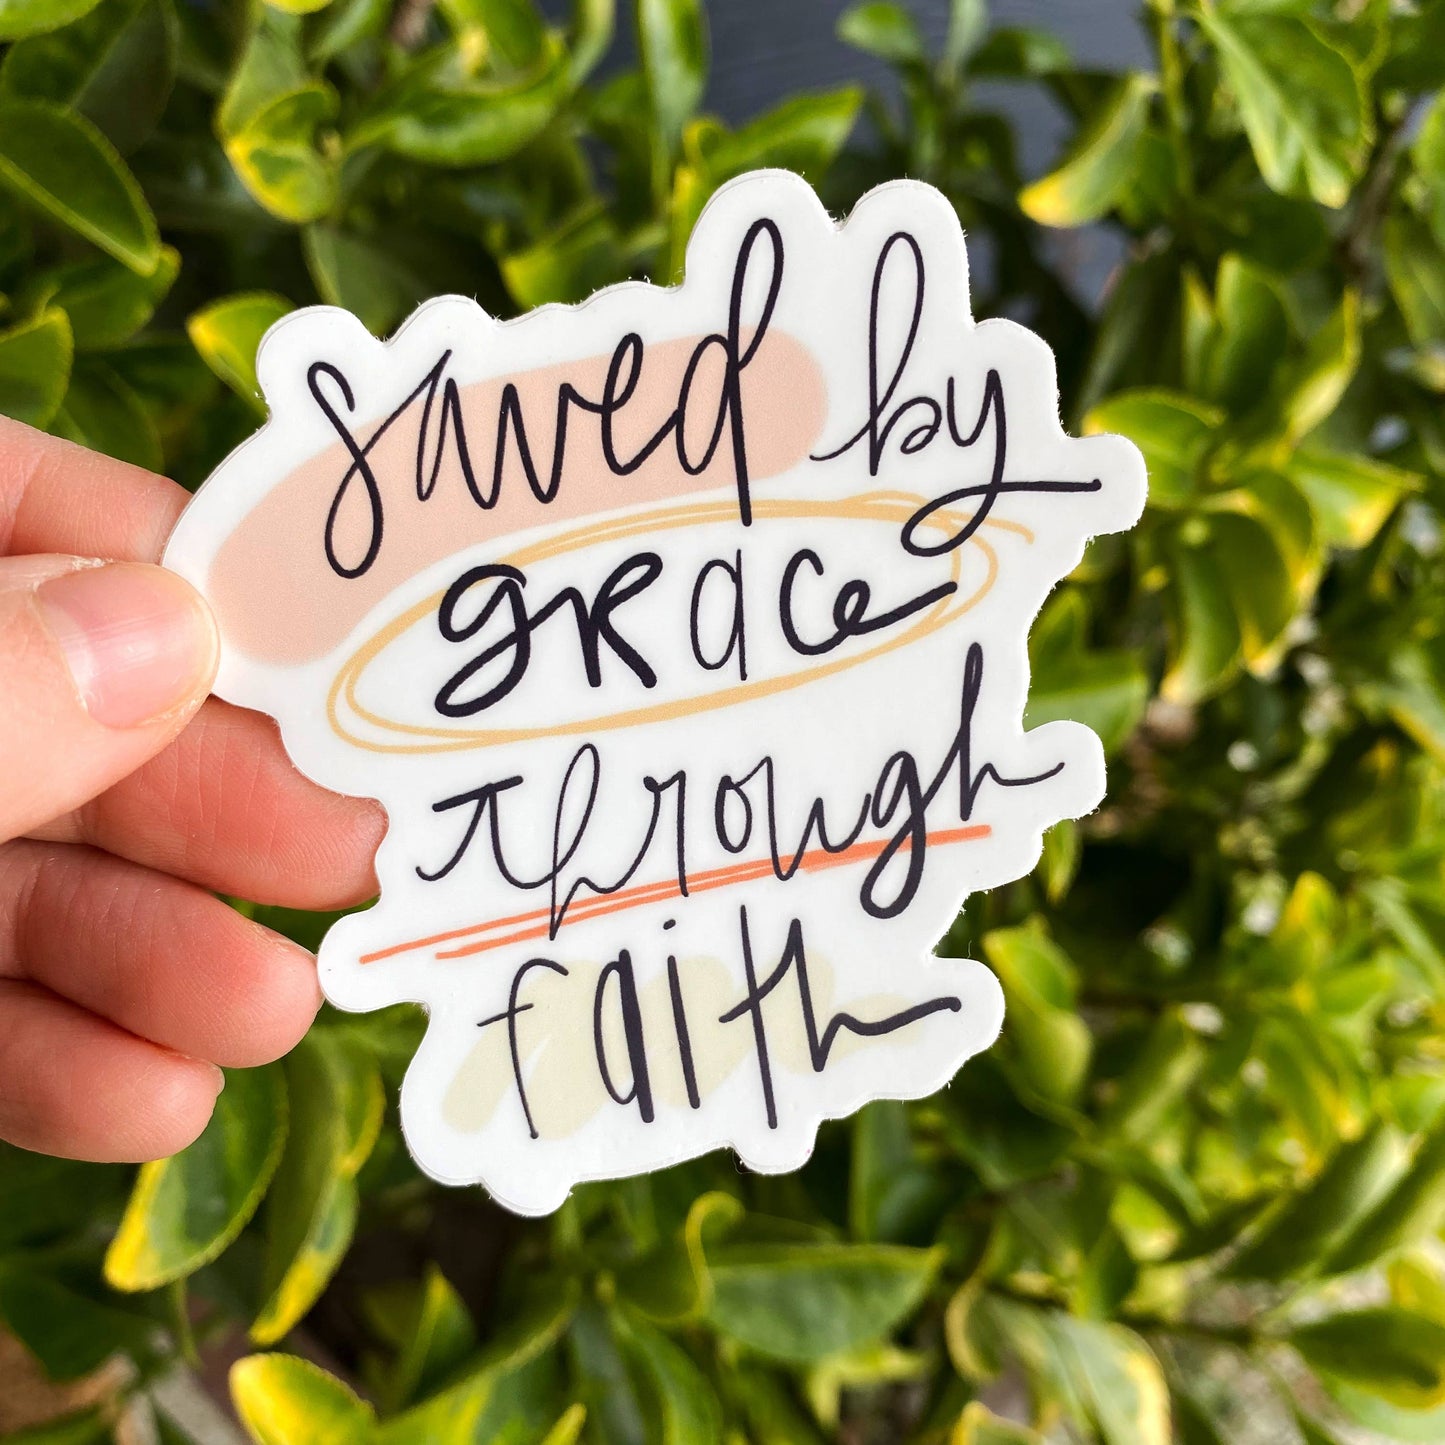 Saved By Grace Through Faith Sticker *FREE SHIPPING with any order over $10